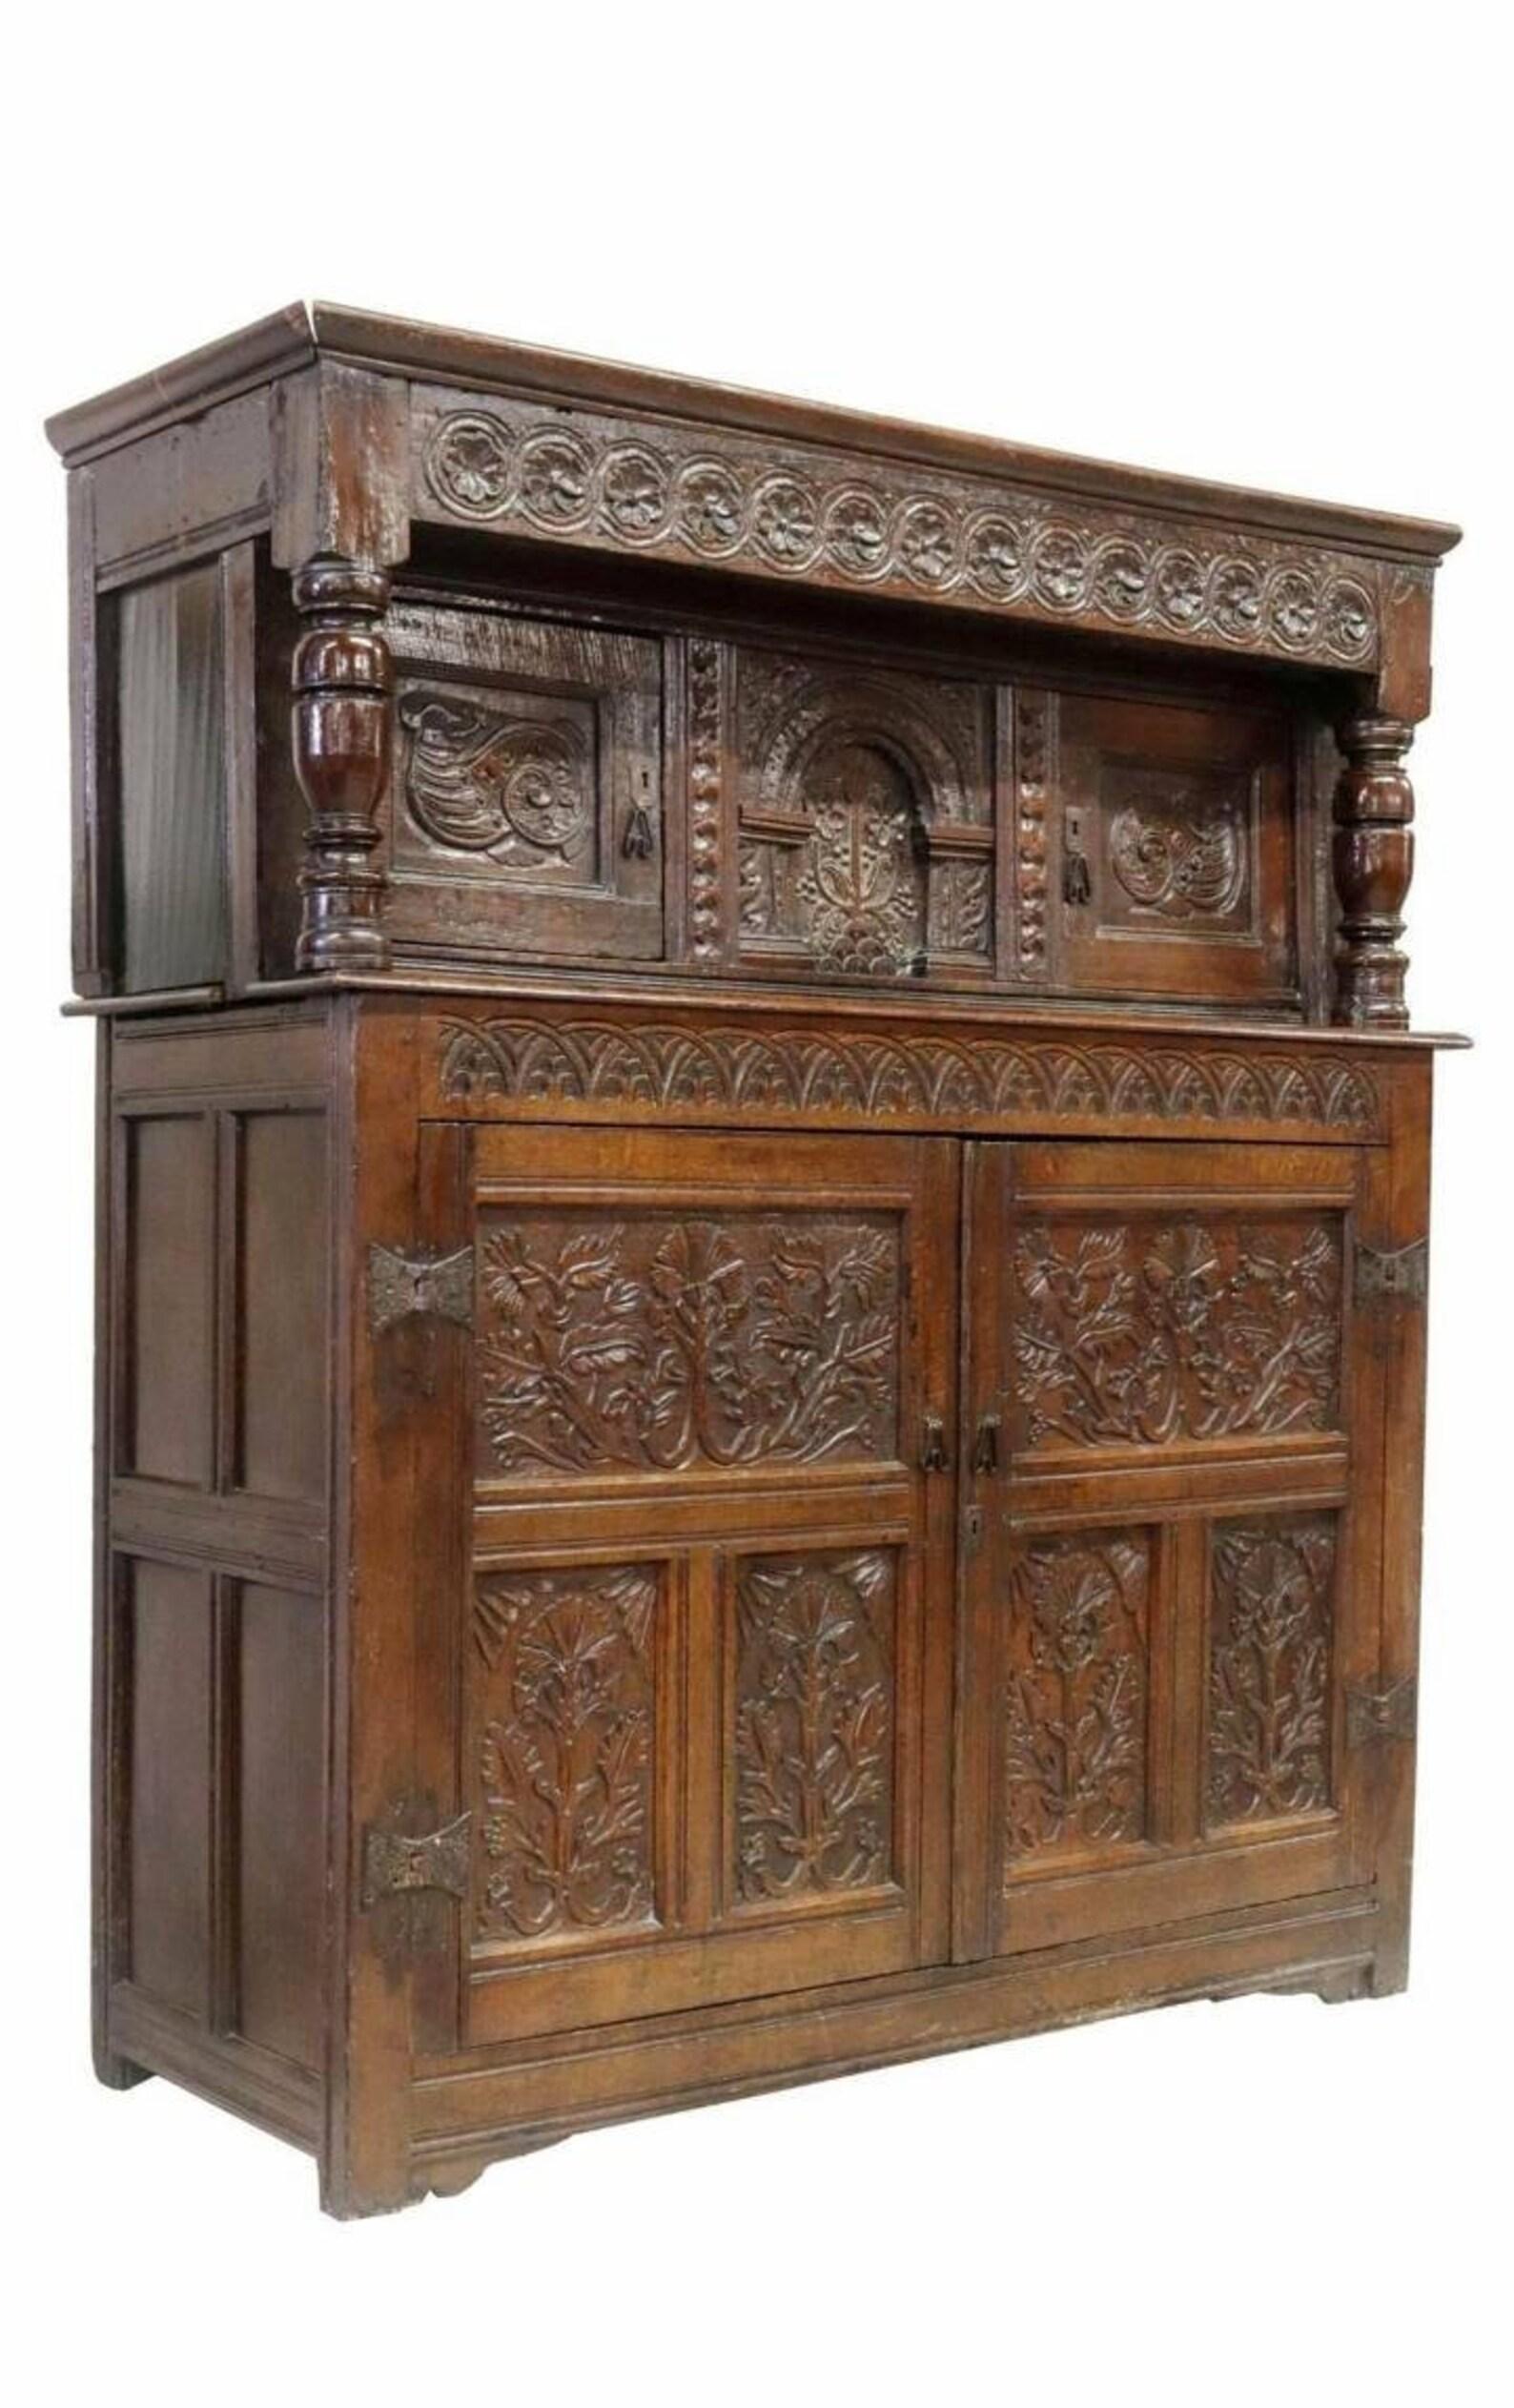 A most impressive antique, circa 1660-1700, English carved oak court cupboard (sideboard) with outstanding dark rich patina.

Born in England, most likely North County, dating to the late 17th century - possibly very early 18th century,